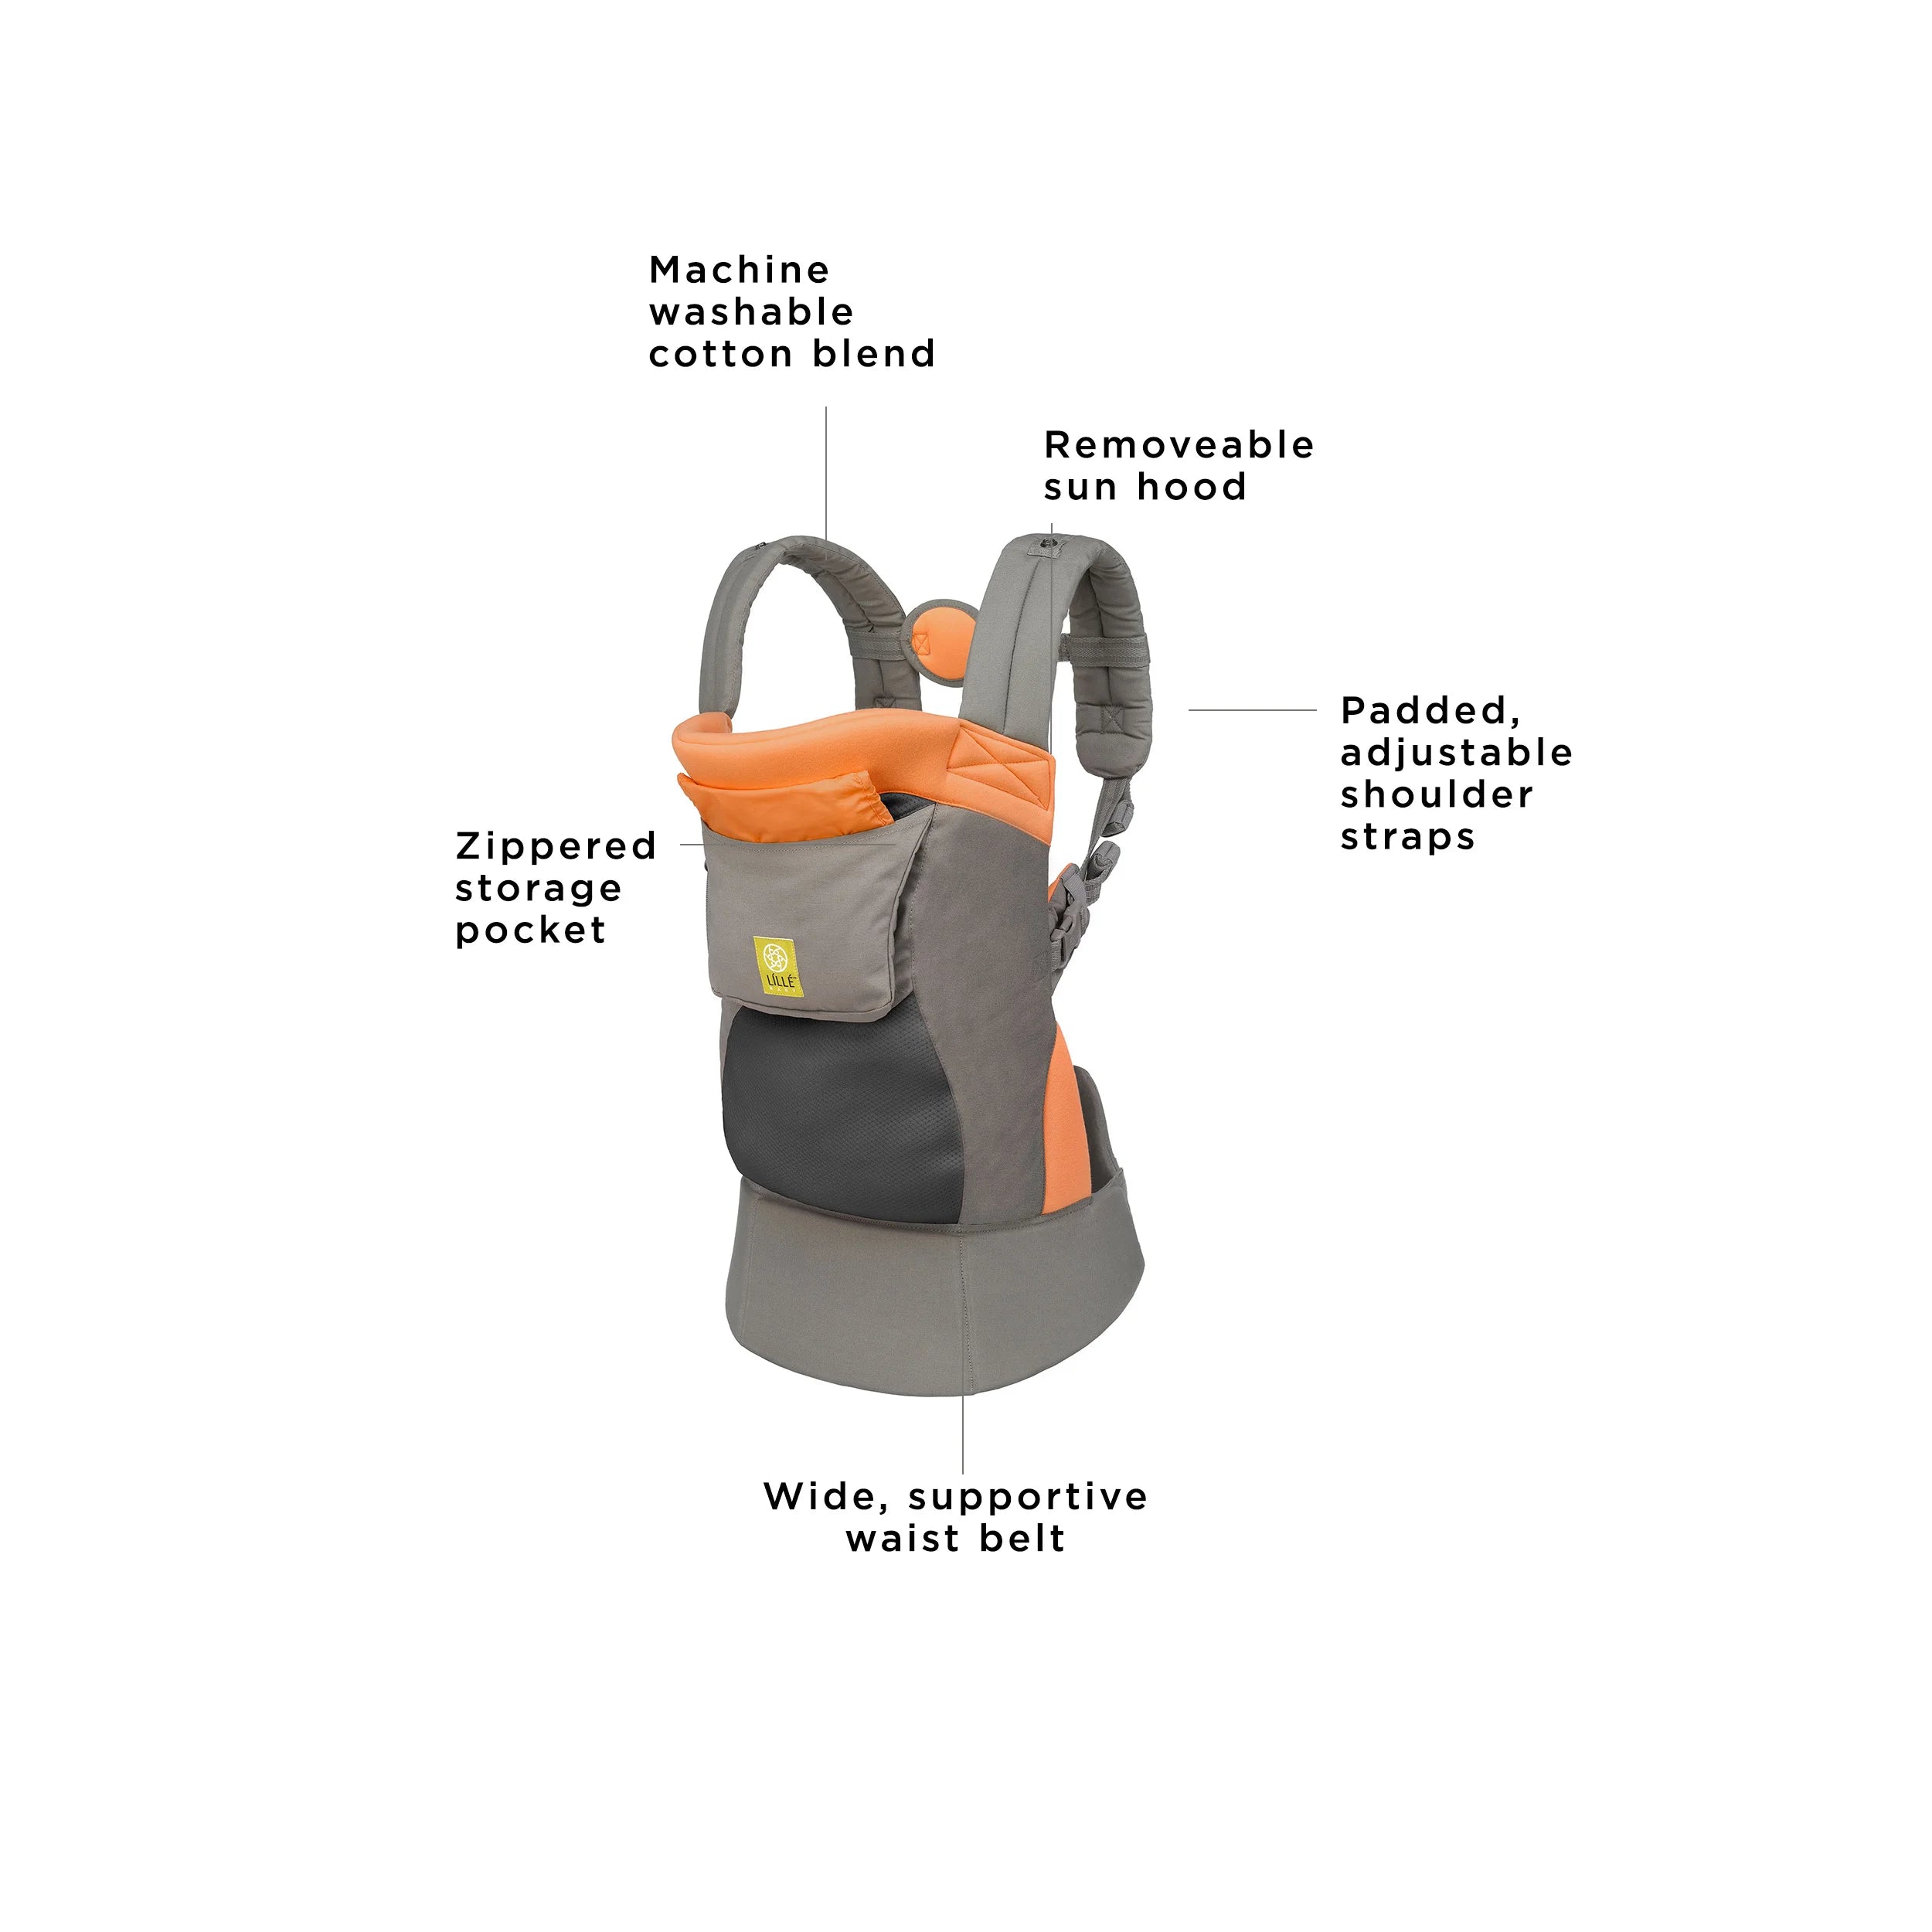 carryon airflow carriers are machine washable cotton blend, removeable sun hood, zippered storage pocket, padded adjustable shoulder straps, and wide supportive waist belt